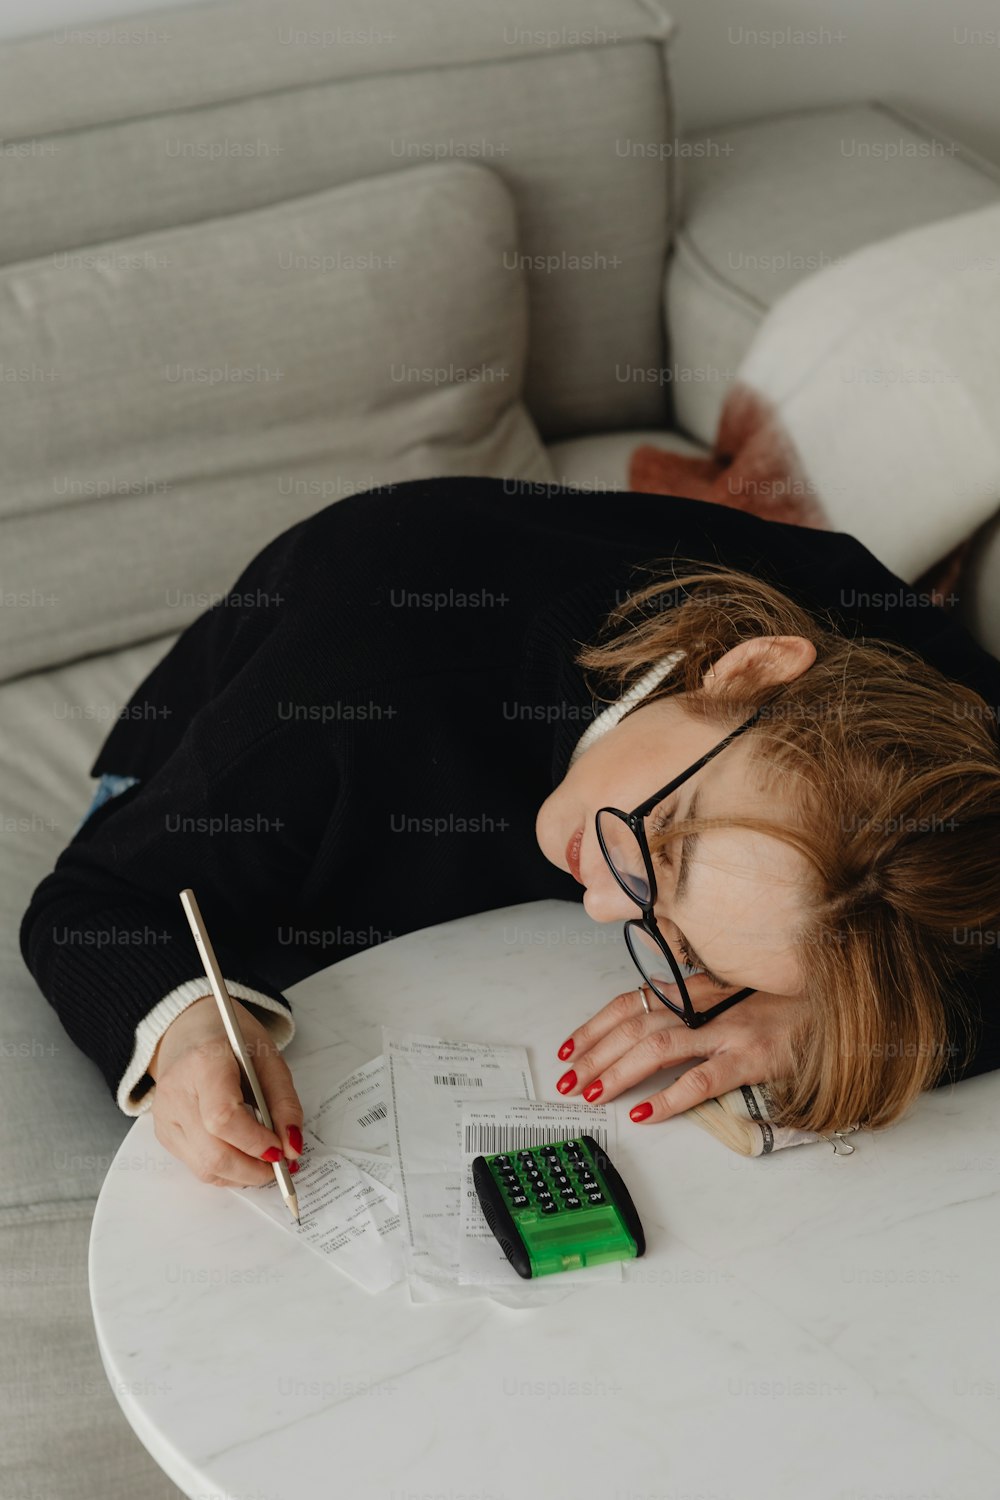 a woman laying on top of a white table next to a calculator